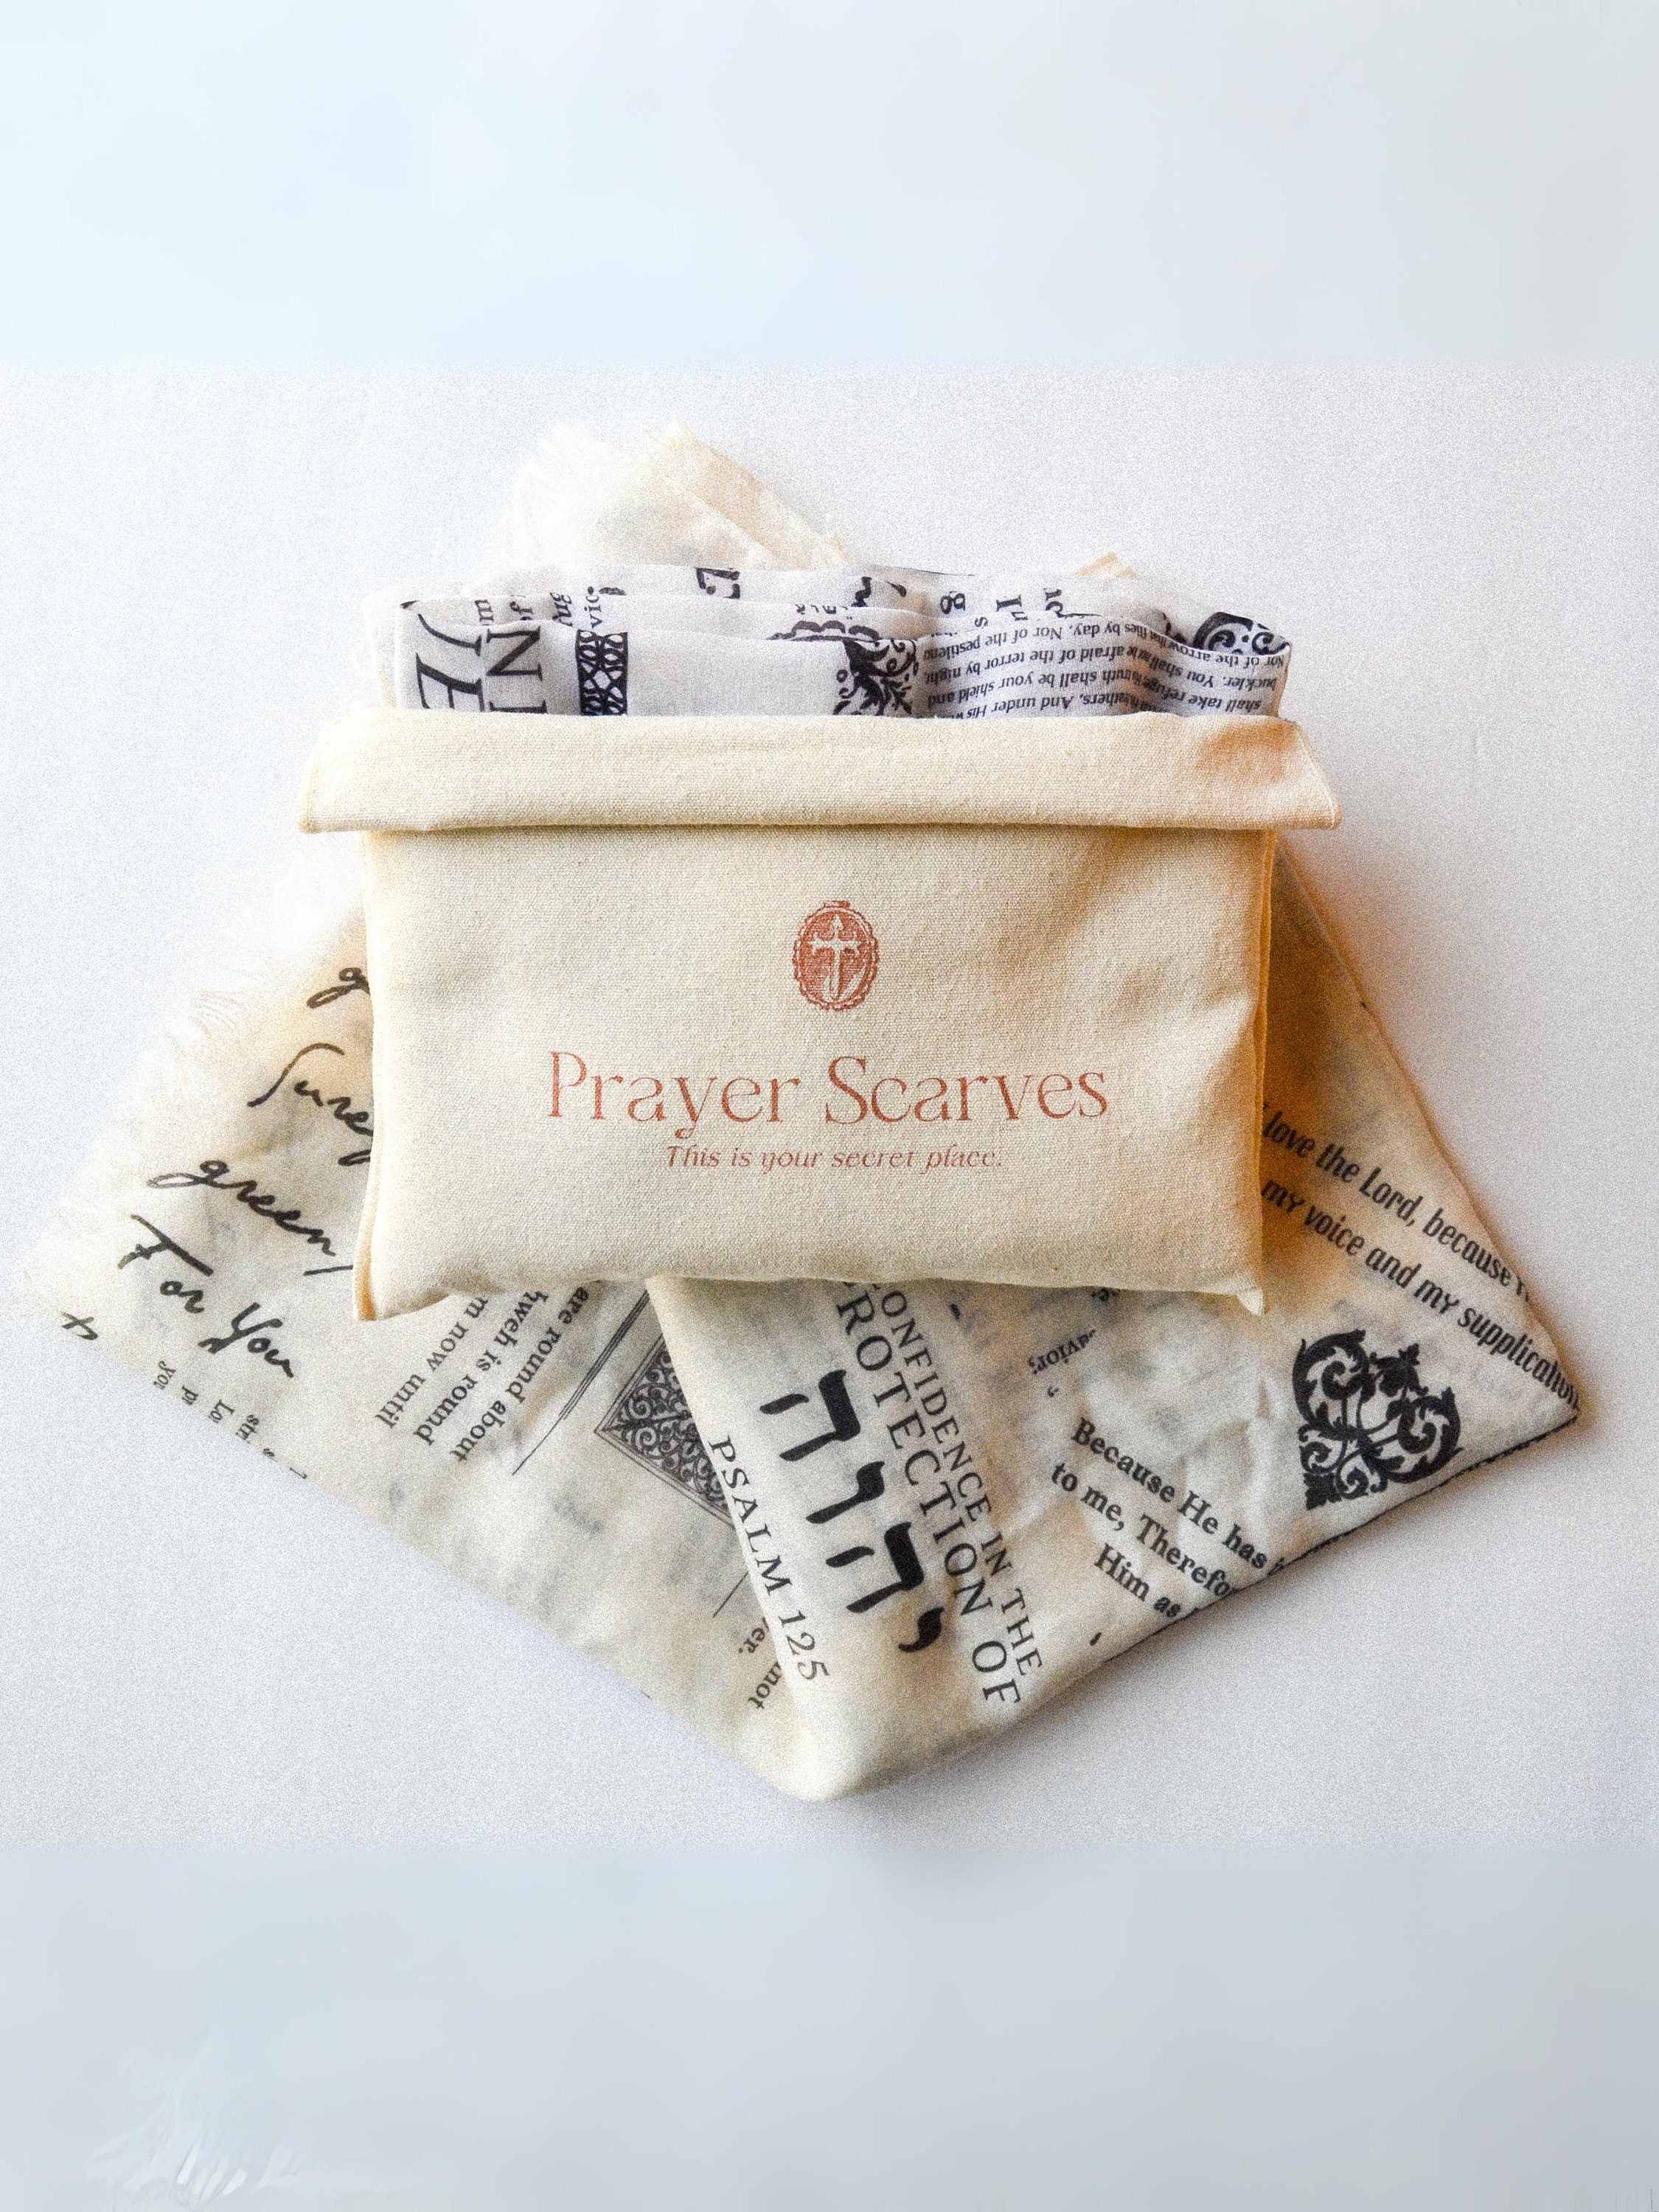 Christian Prayer Shawl, Prayer Scarf With Bible Verses About God's